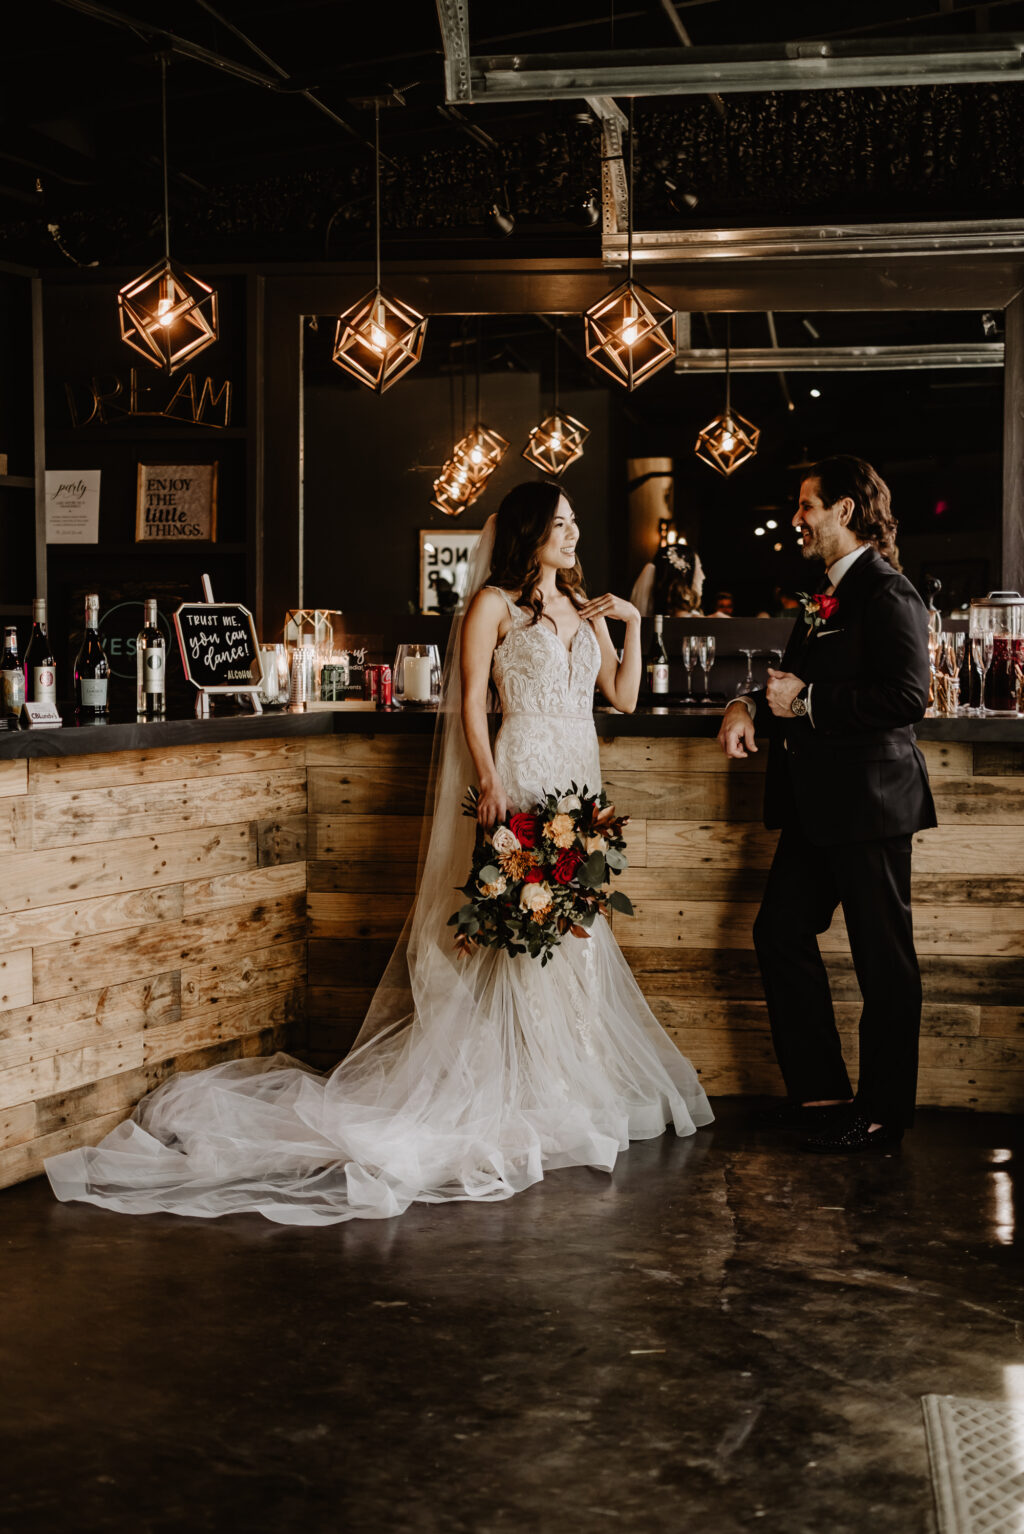 Moody Wedding Reception Bar With Geometric Lighting | Tampa Bay Wedding Venue The West Events | Dress Truly Forever Bridal